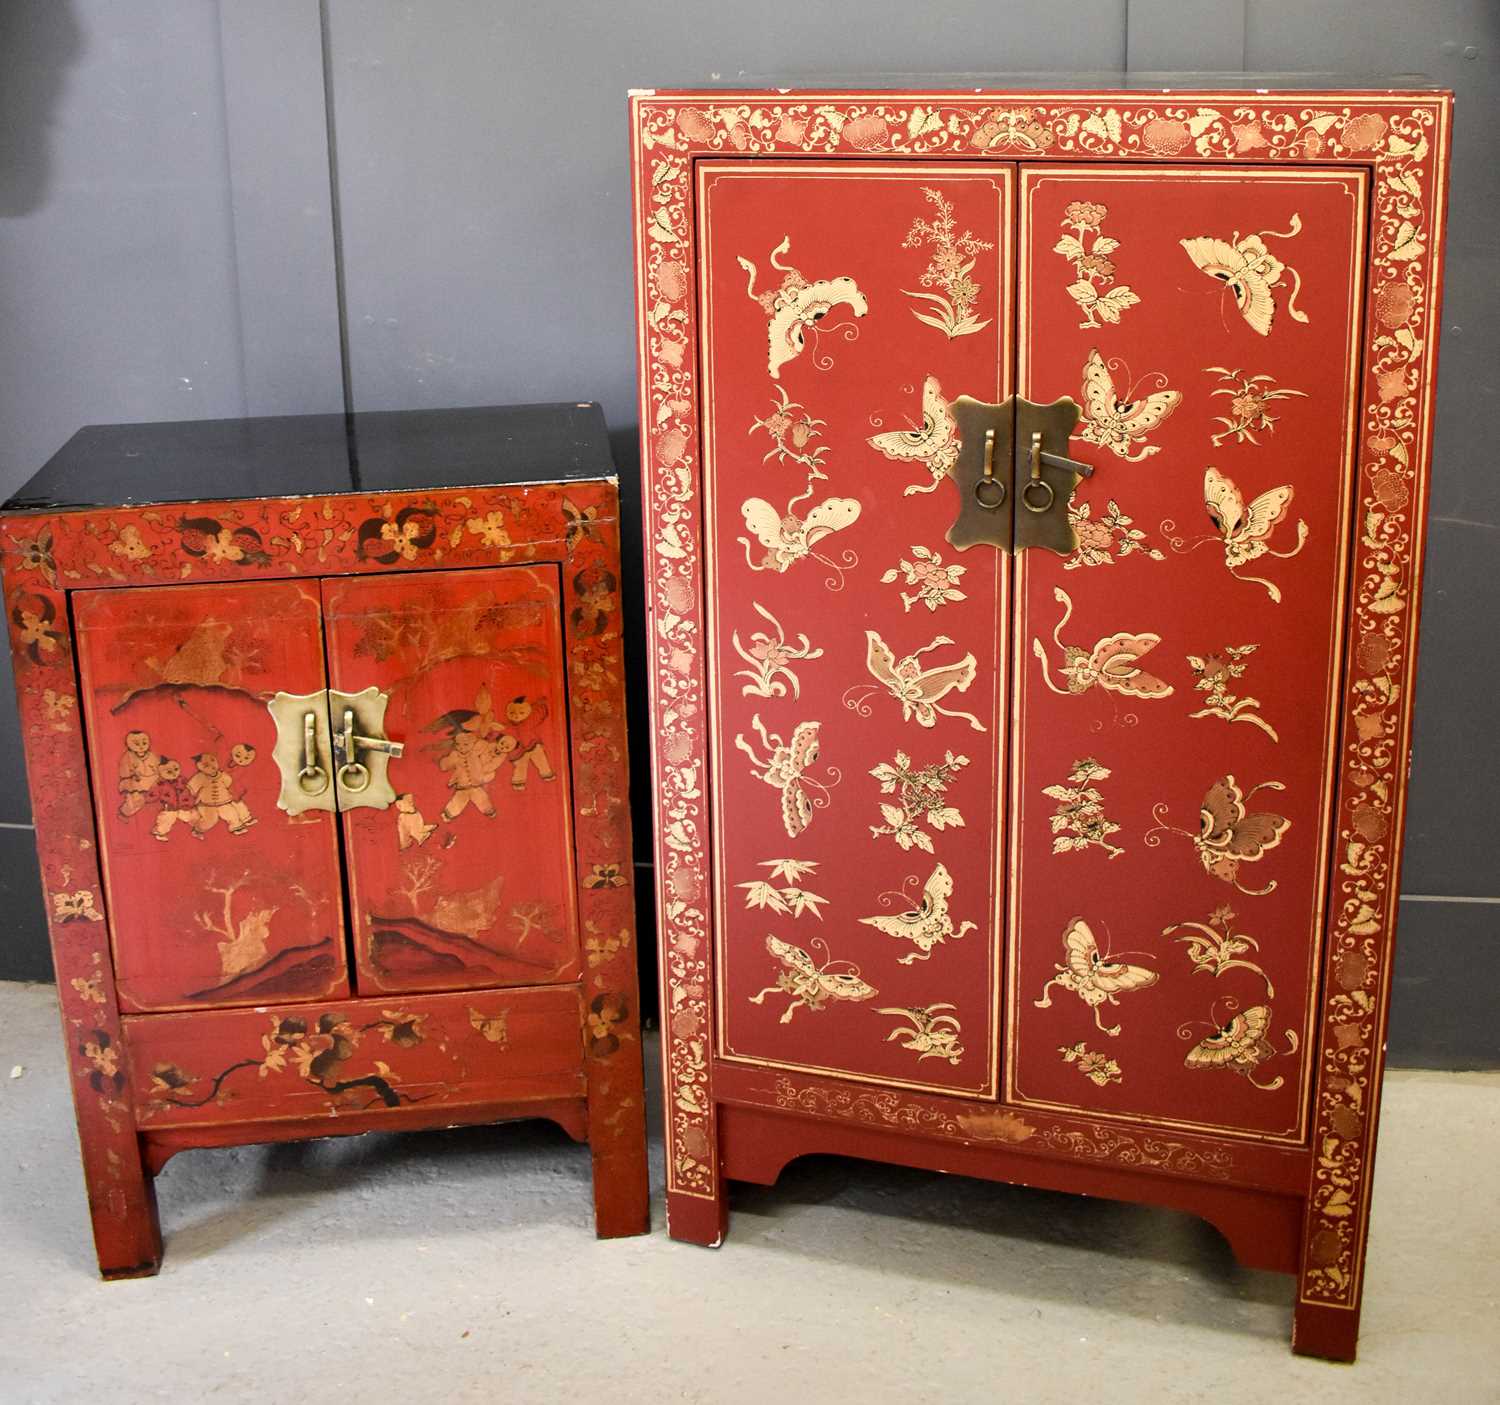 Two Chinese red lacquered cabinets, one decorated with gilded butterflies and flowers, the larger